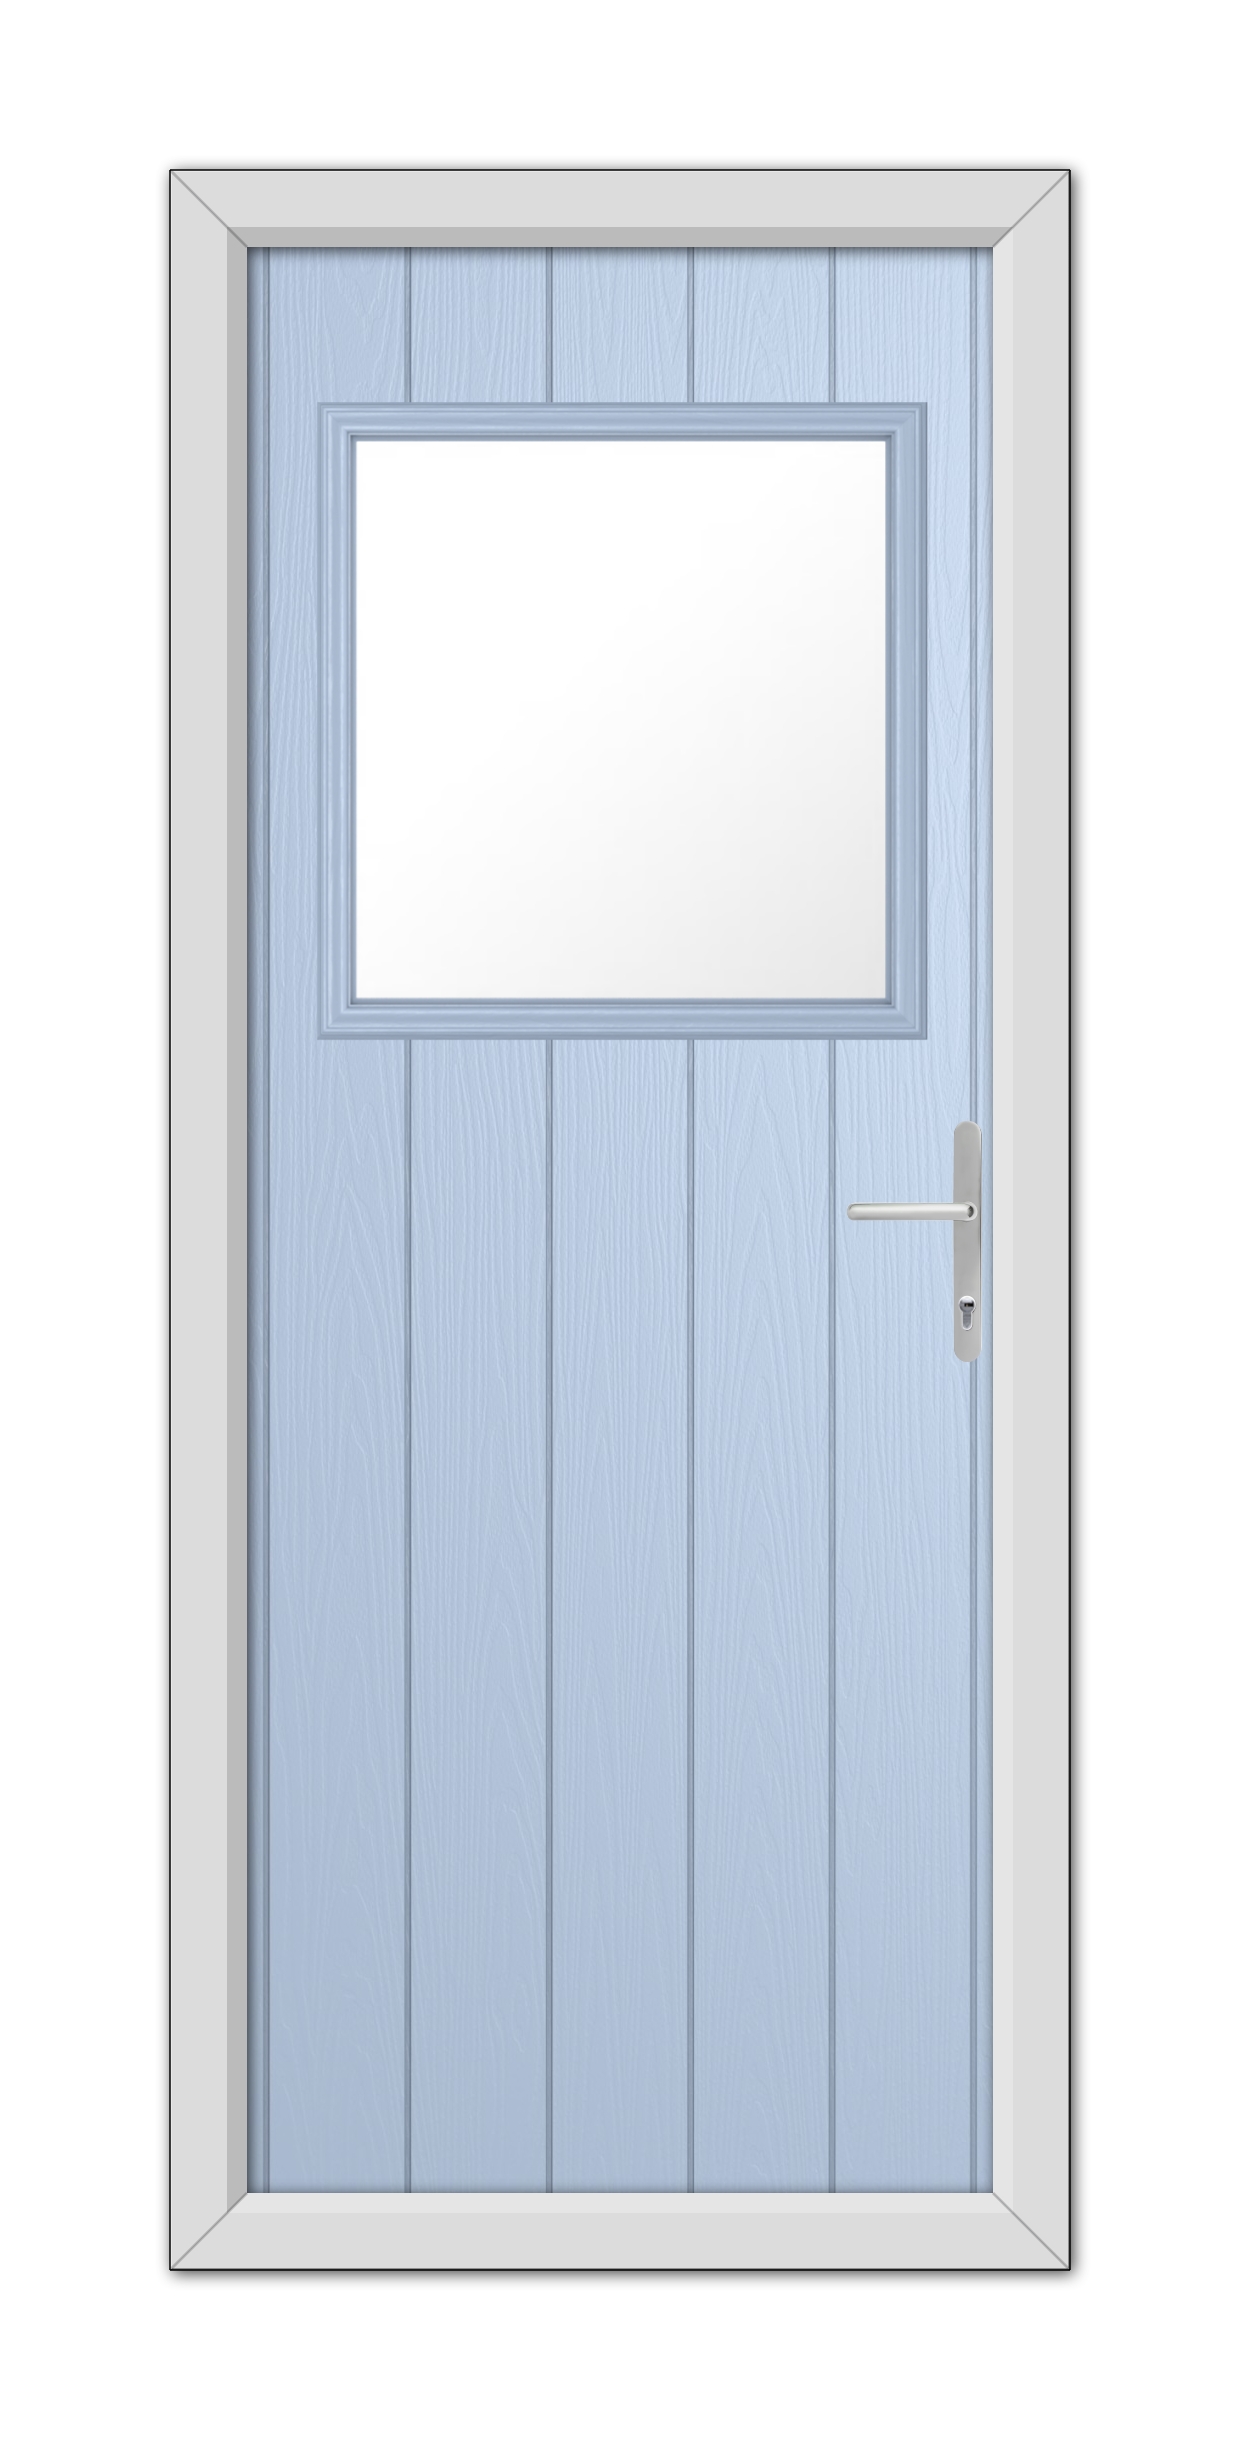 A Duck Egg Blue Fife Composite Door with a rectangular window at the top, surrounded by a white frame, and equipped with a metal handle on the right side.